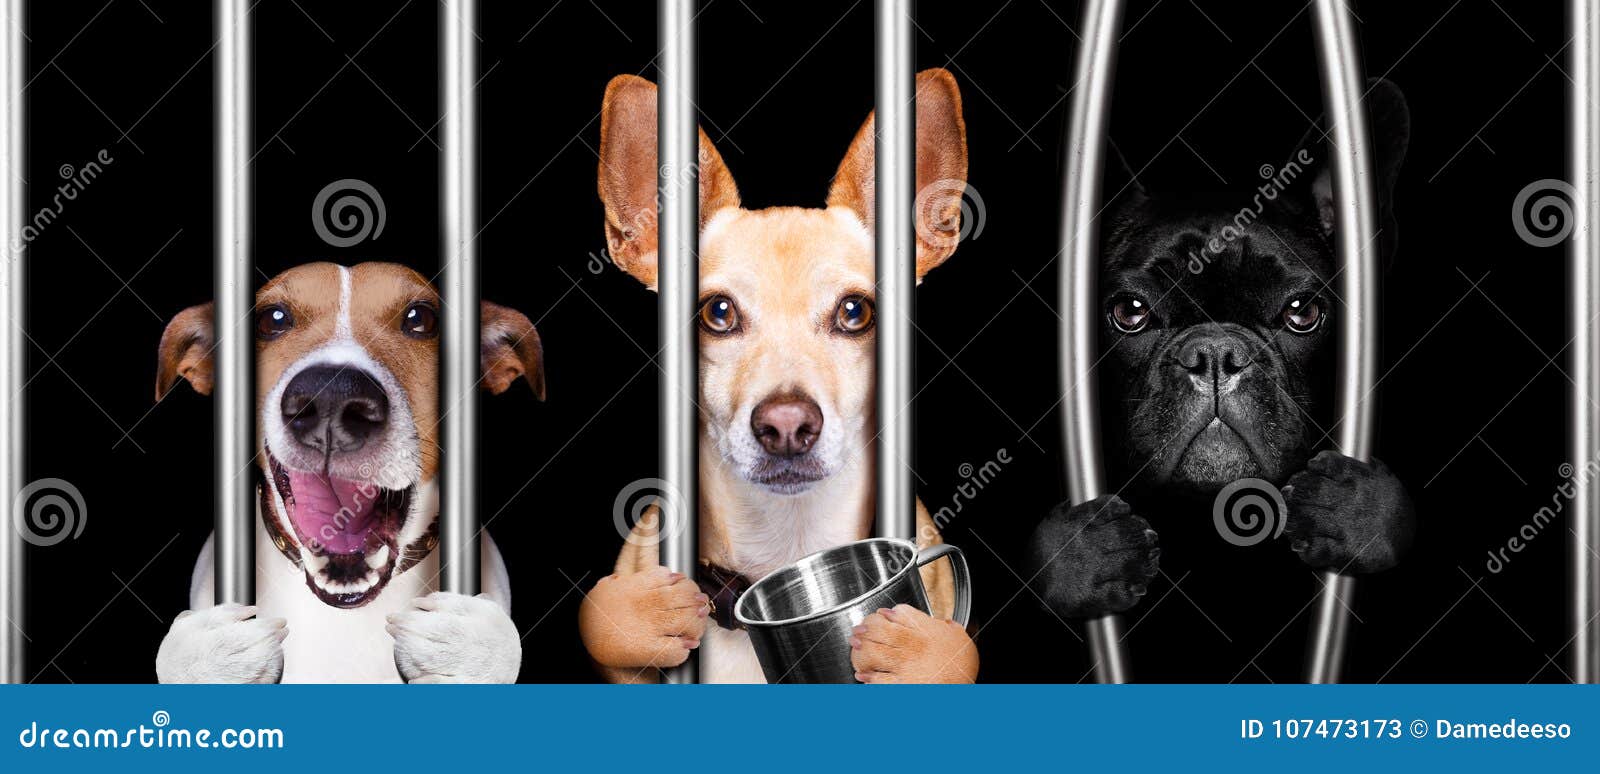 dogs behind bars in jail prison